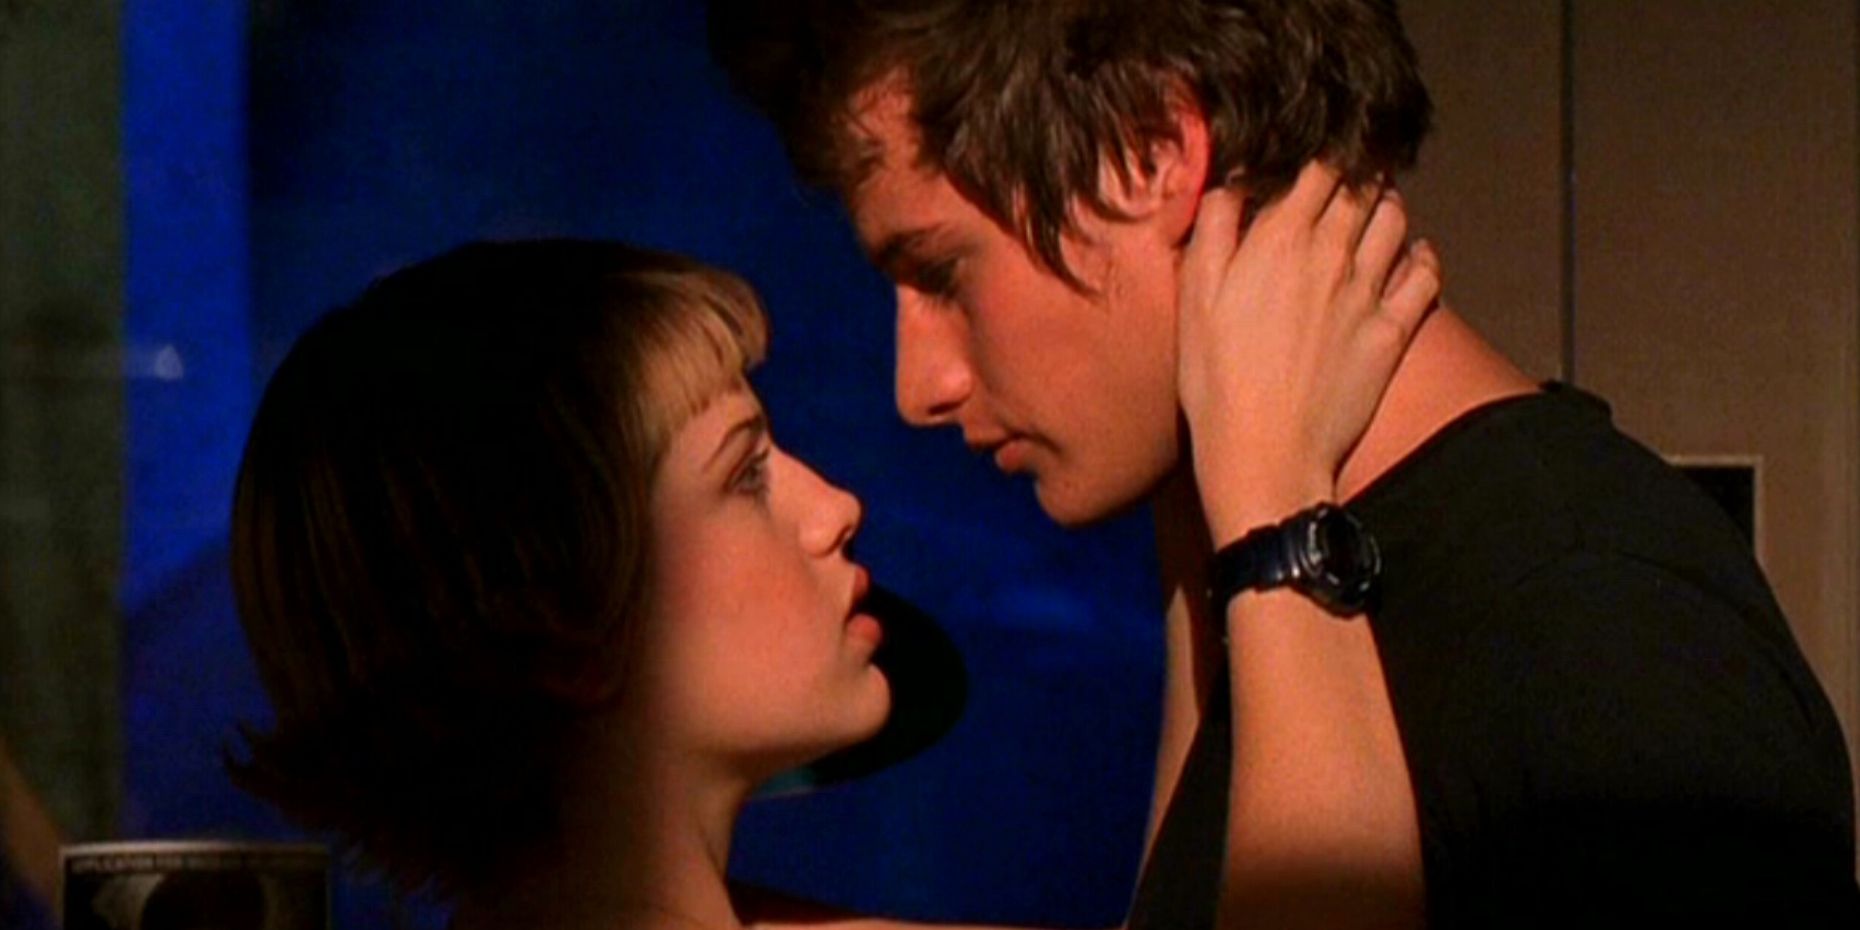 Roswell: 5 Best Couples In The Original Series (& The 5 Worst)